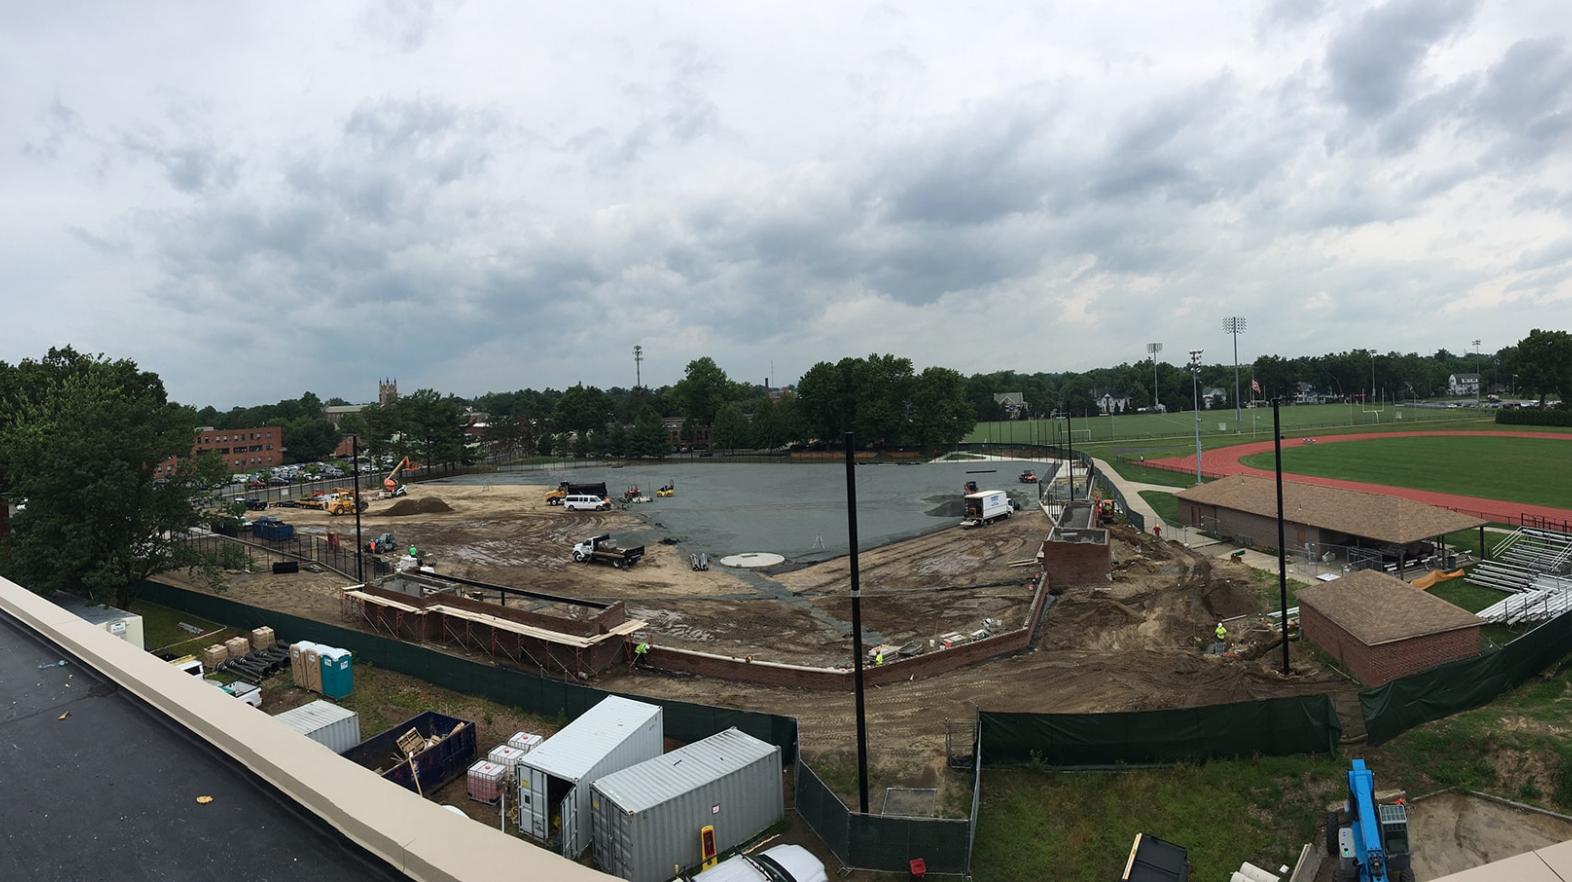 Knee wall, dugouts and field base fabric are being installed (7/13/17)